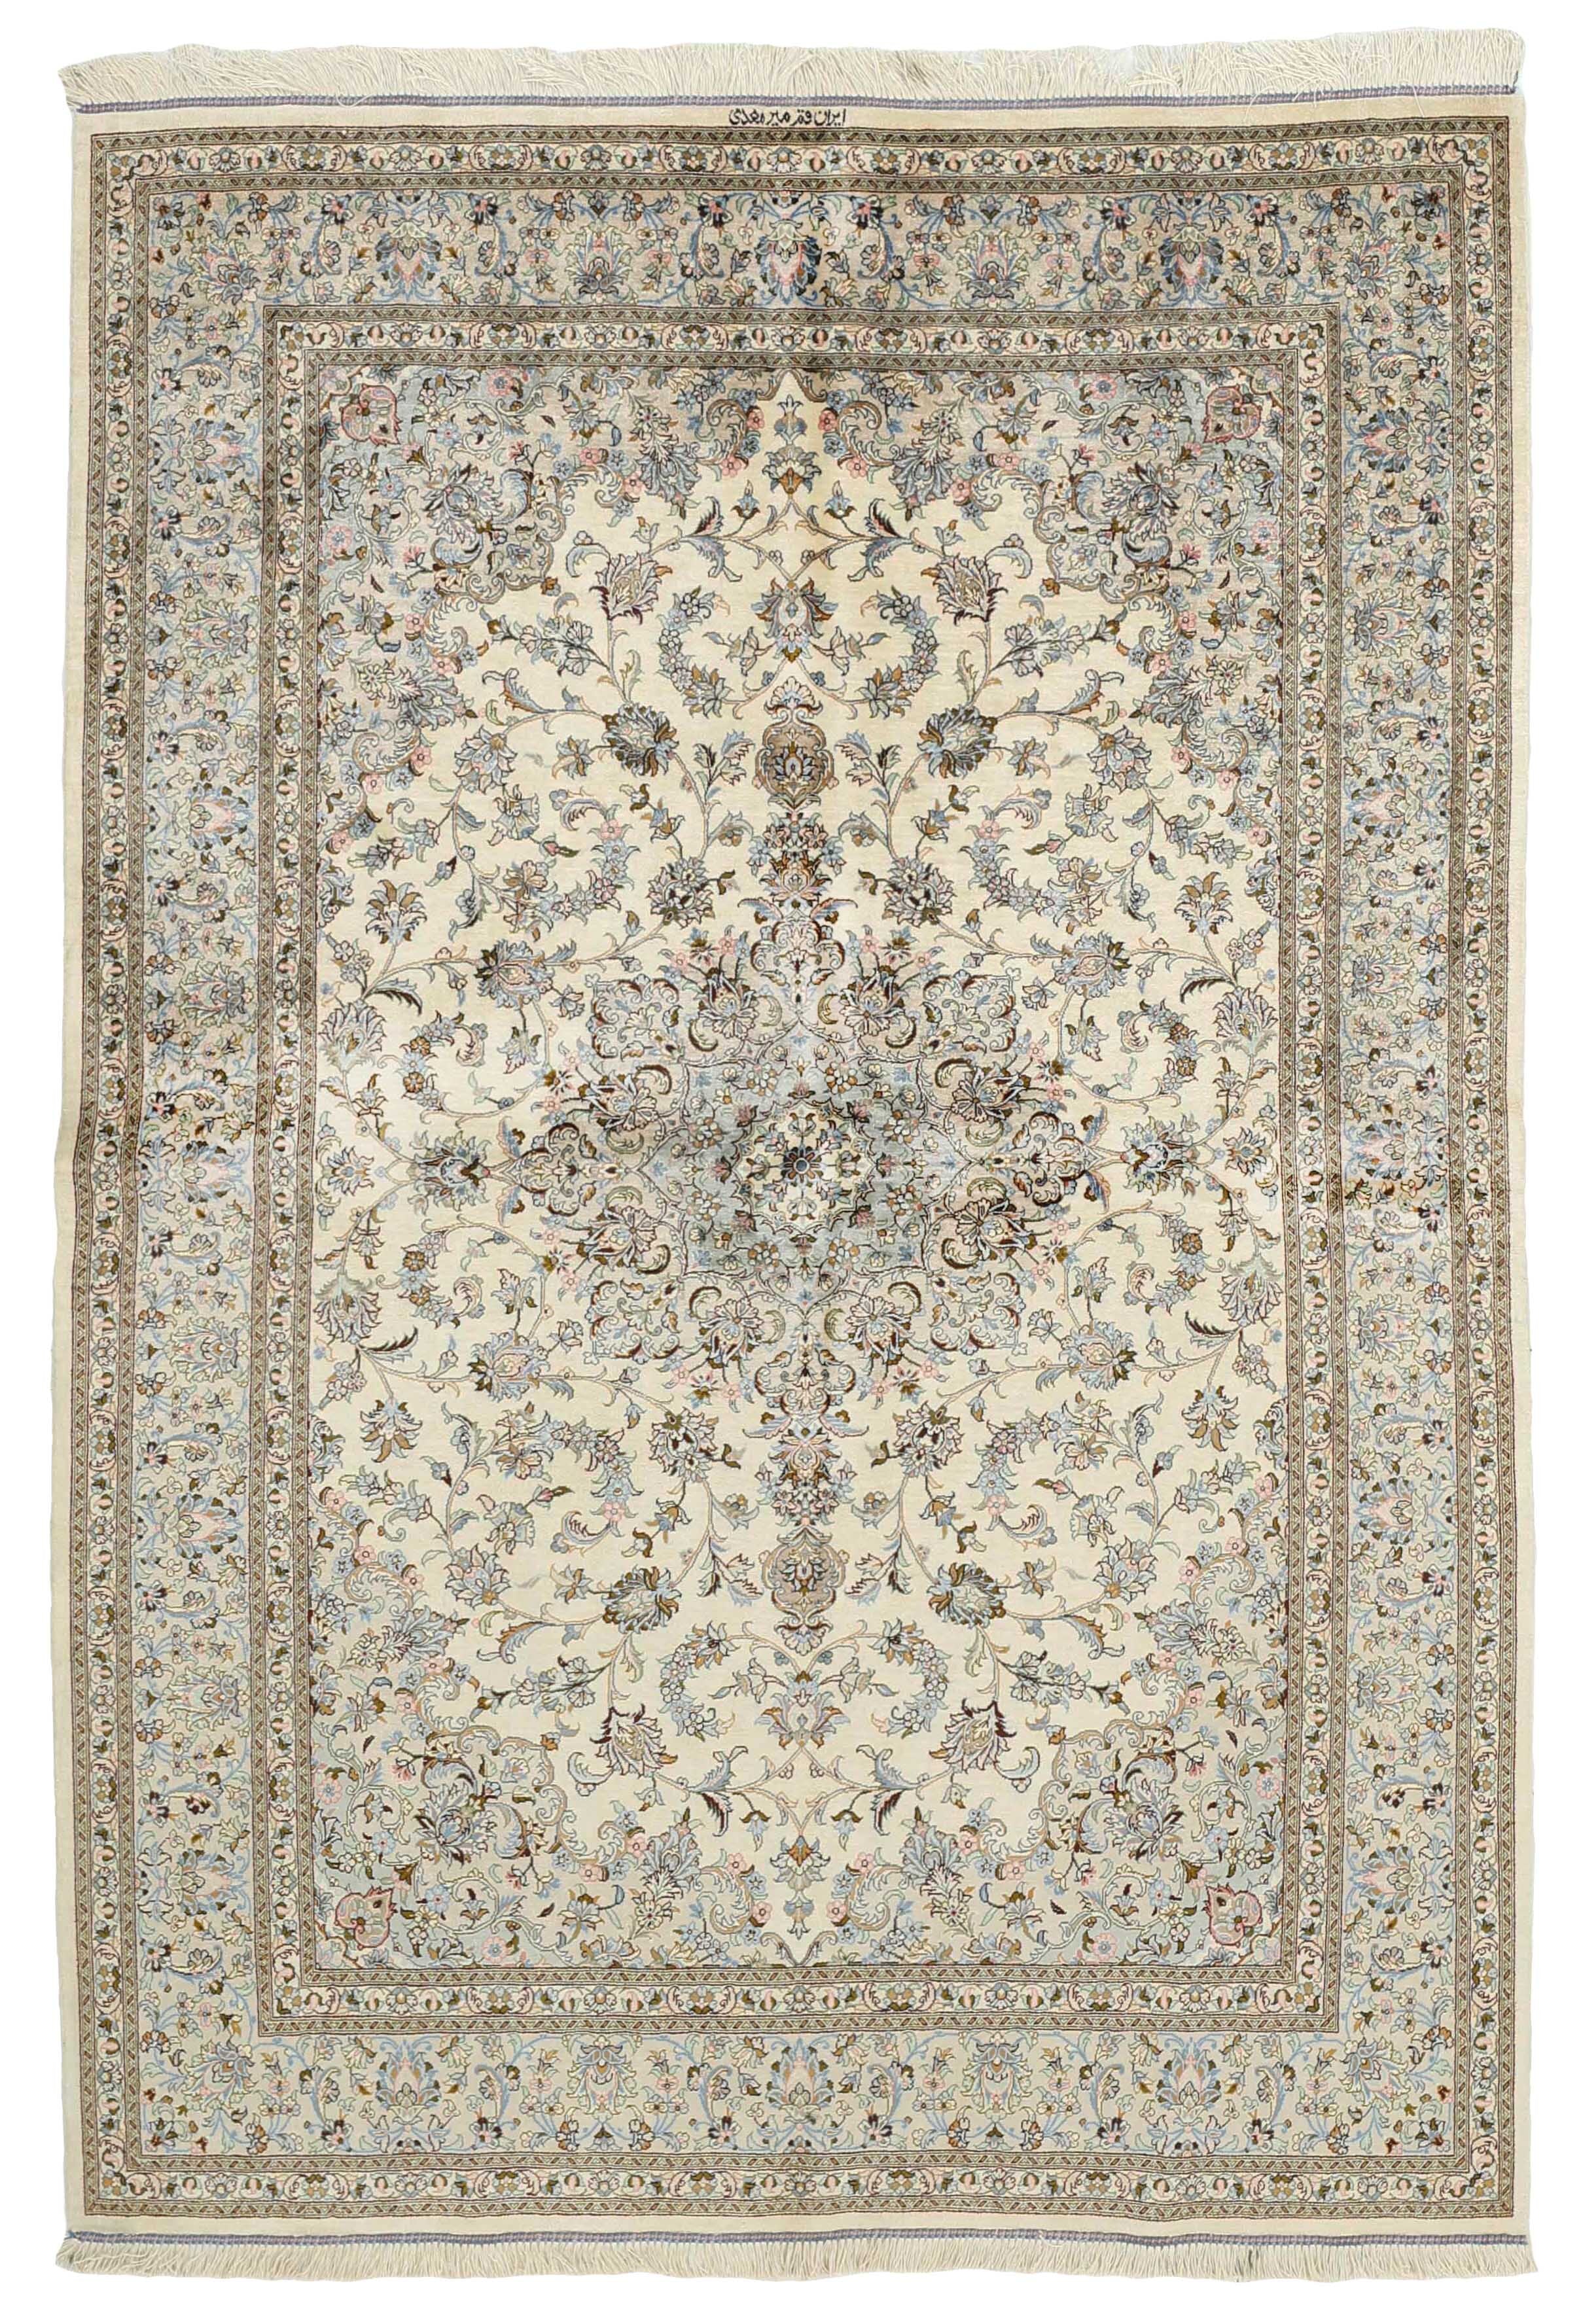 Authentic persian rug with a traditional floral design in cream